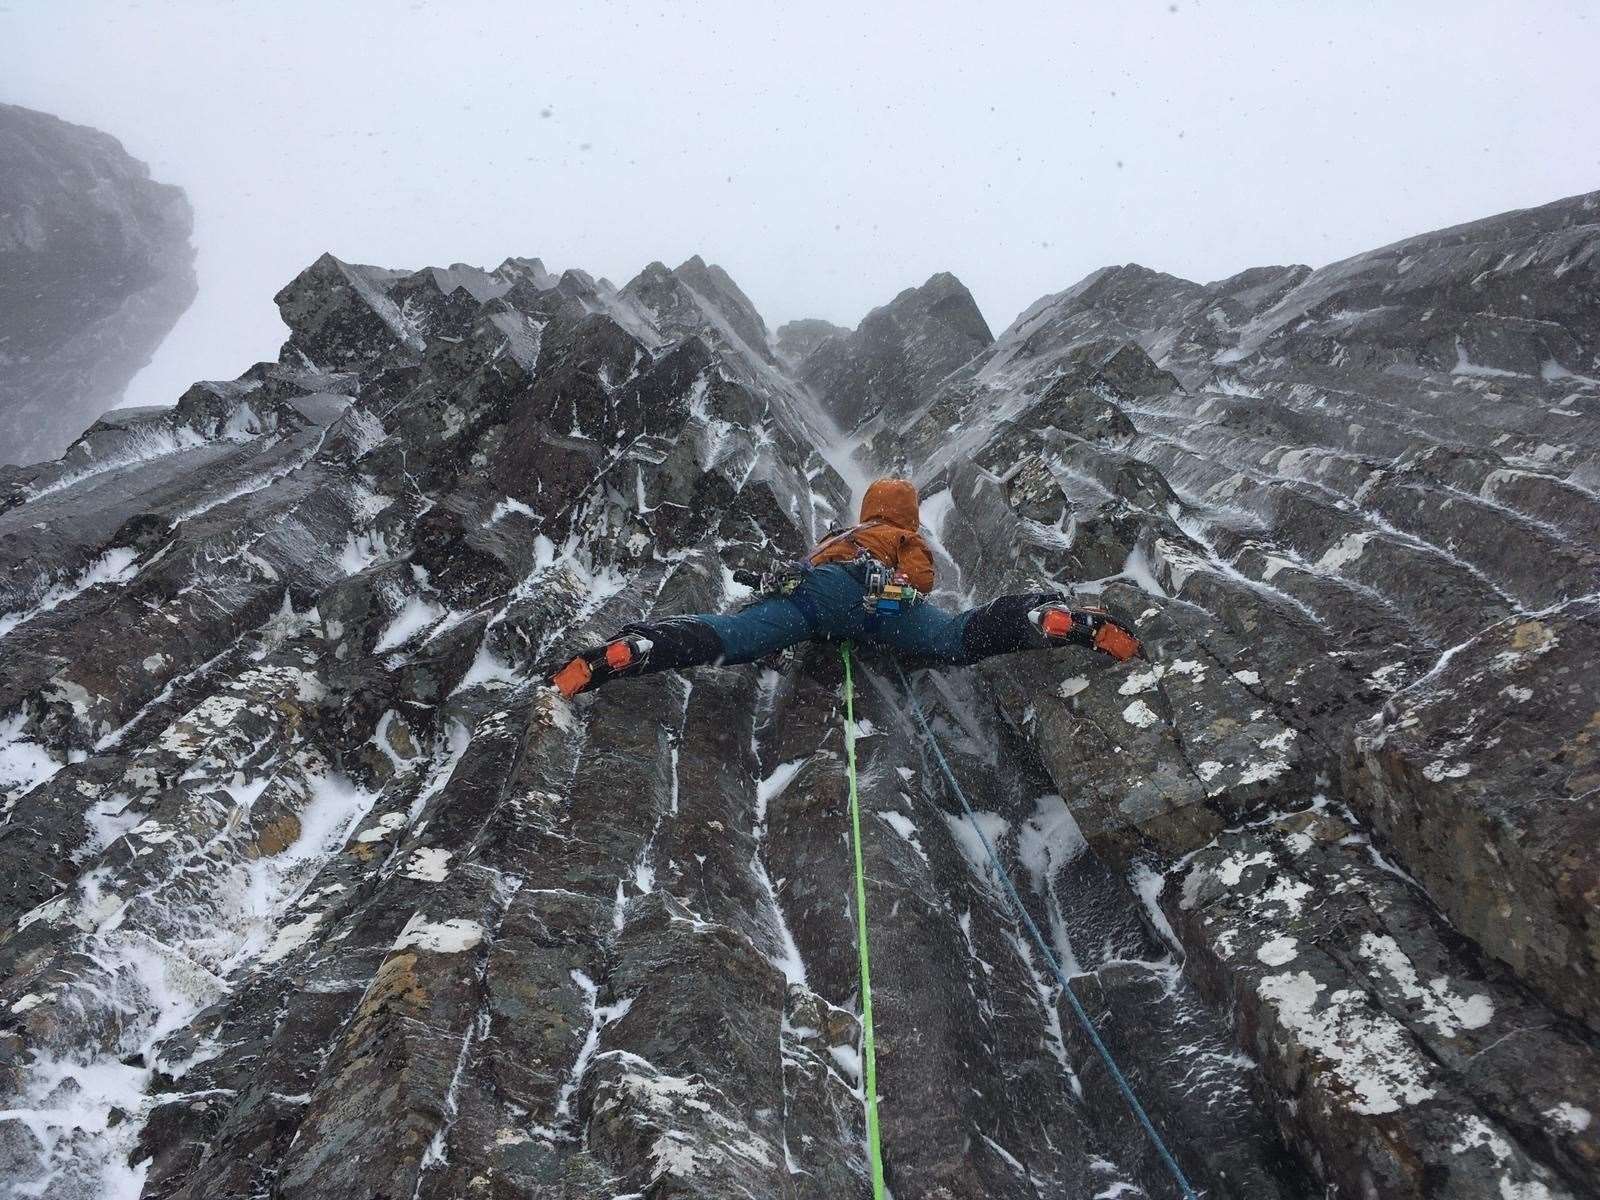 Wadim Jablonski from Poland climbing a hard route in Glen Coe. Picture: Paul Ramsden